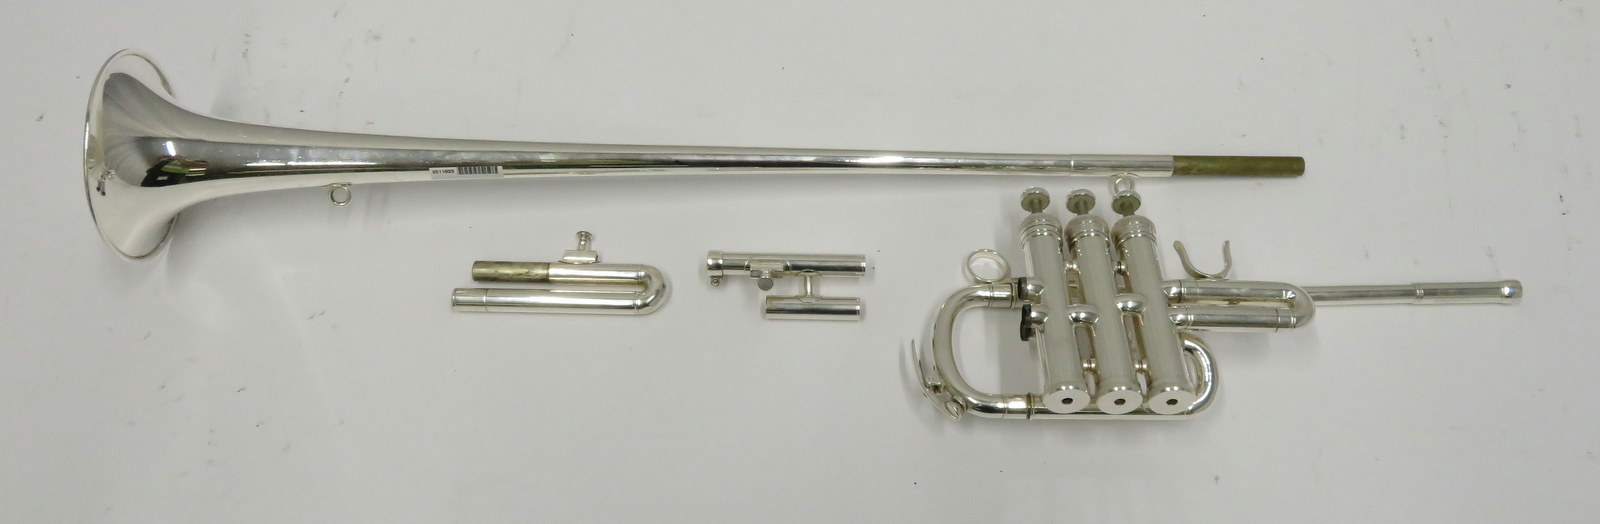 Besson BE706 International fanfare trumpet with case. Serial number: 885996. - Image 2 of 14